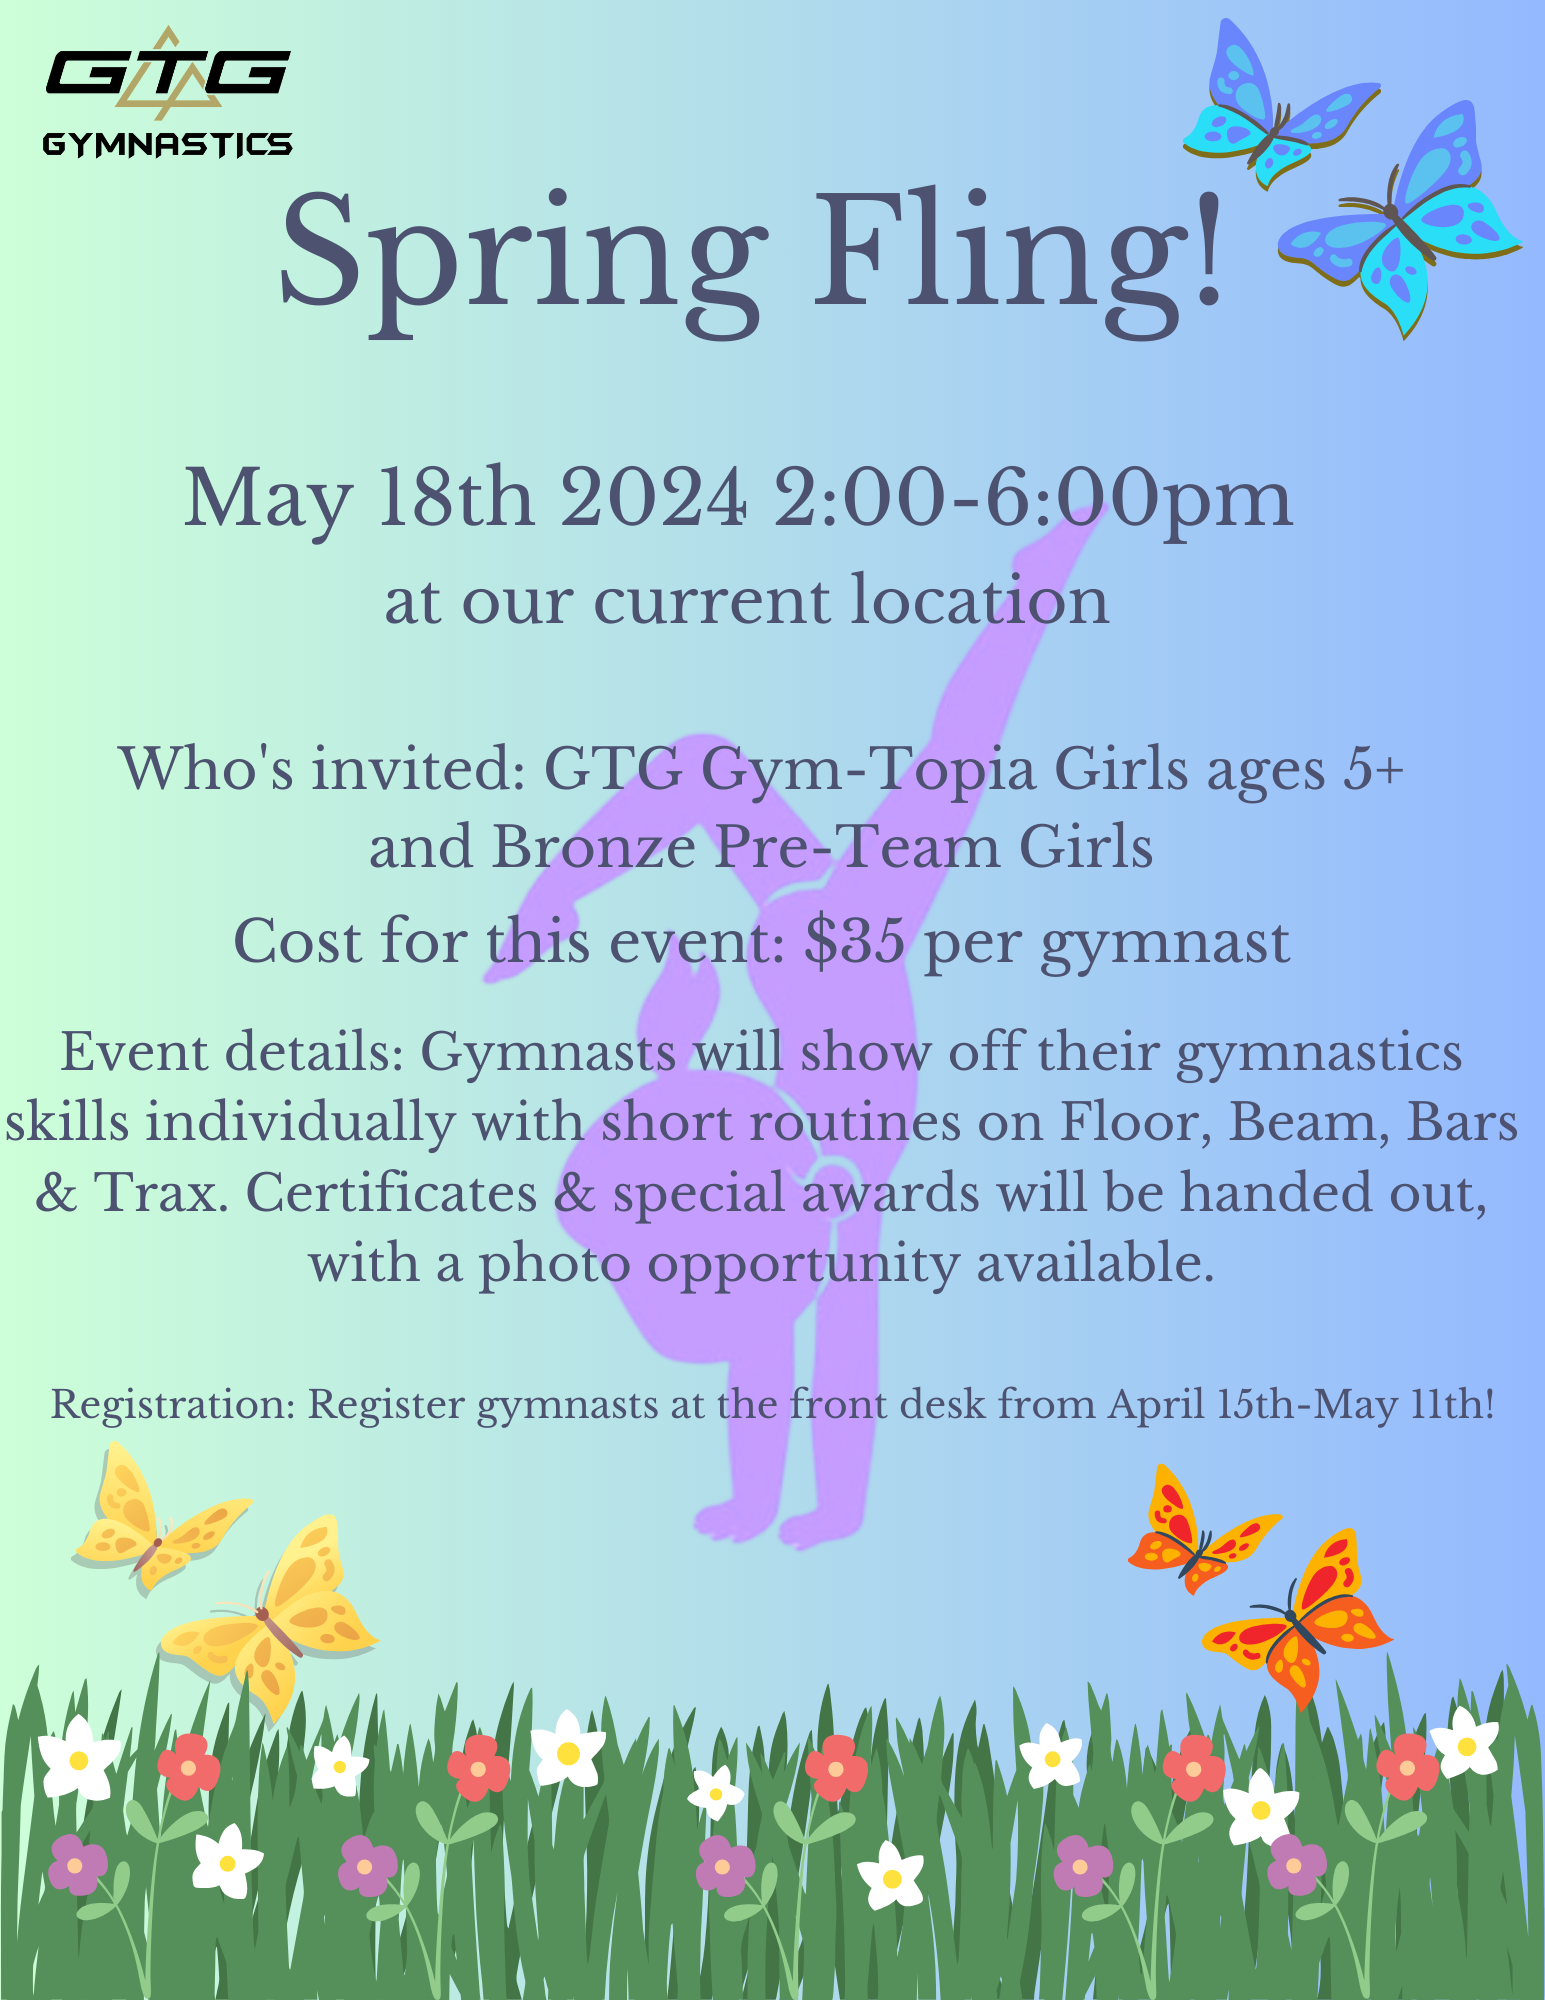 A poster for a spring fling with butterflies and flowers